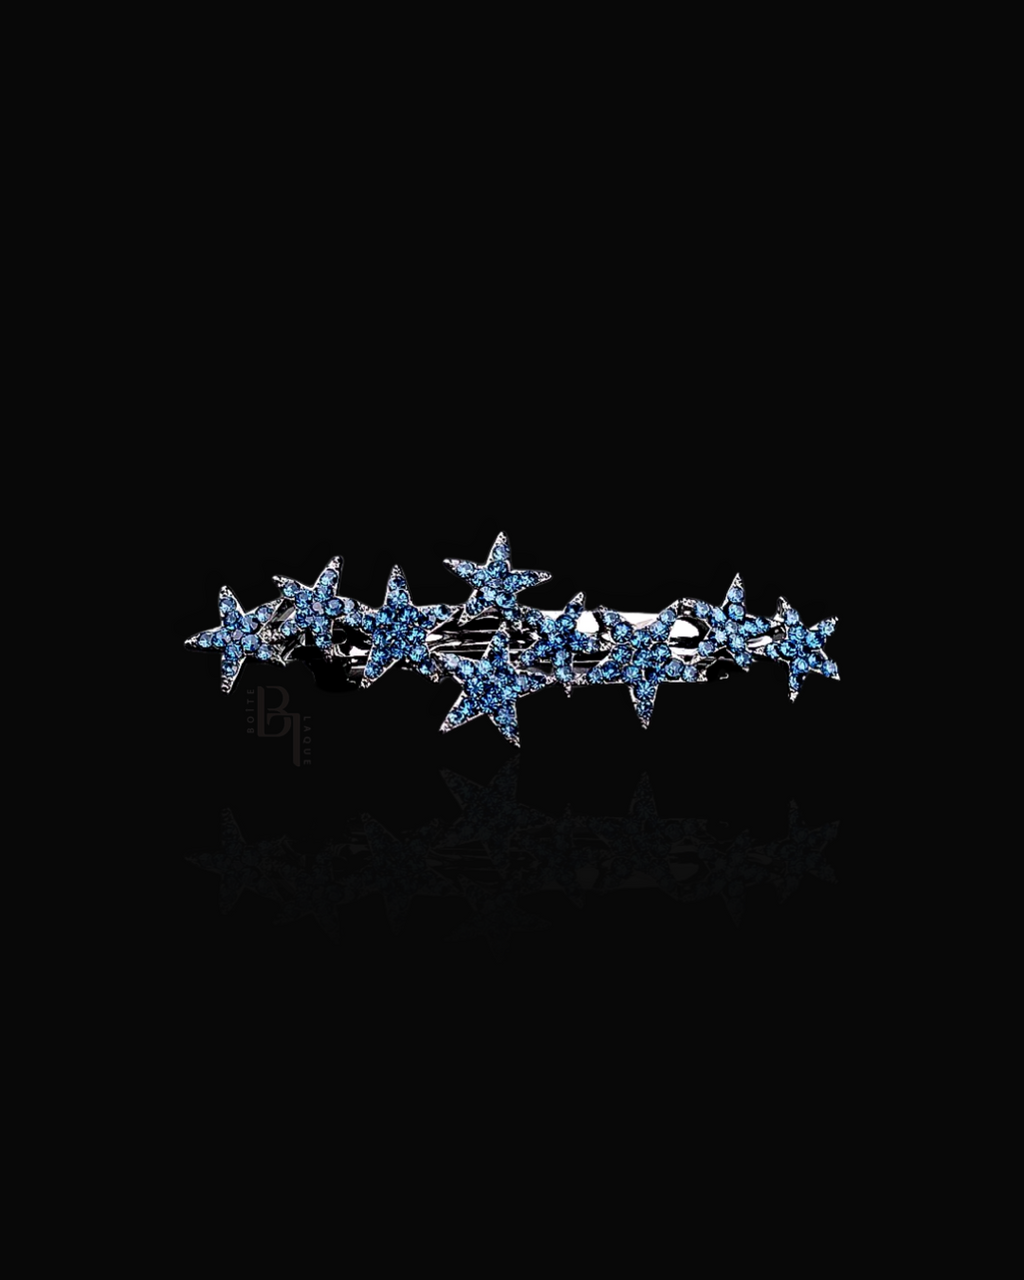 Blue Crystal Stars barrette Clip with Set of Signature Silver Bobby Pins